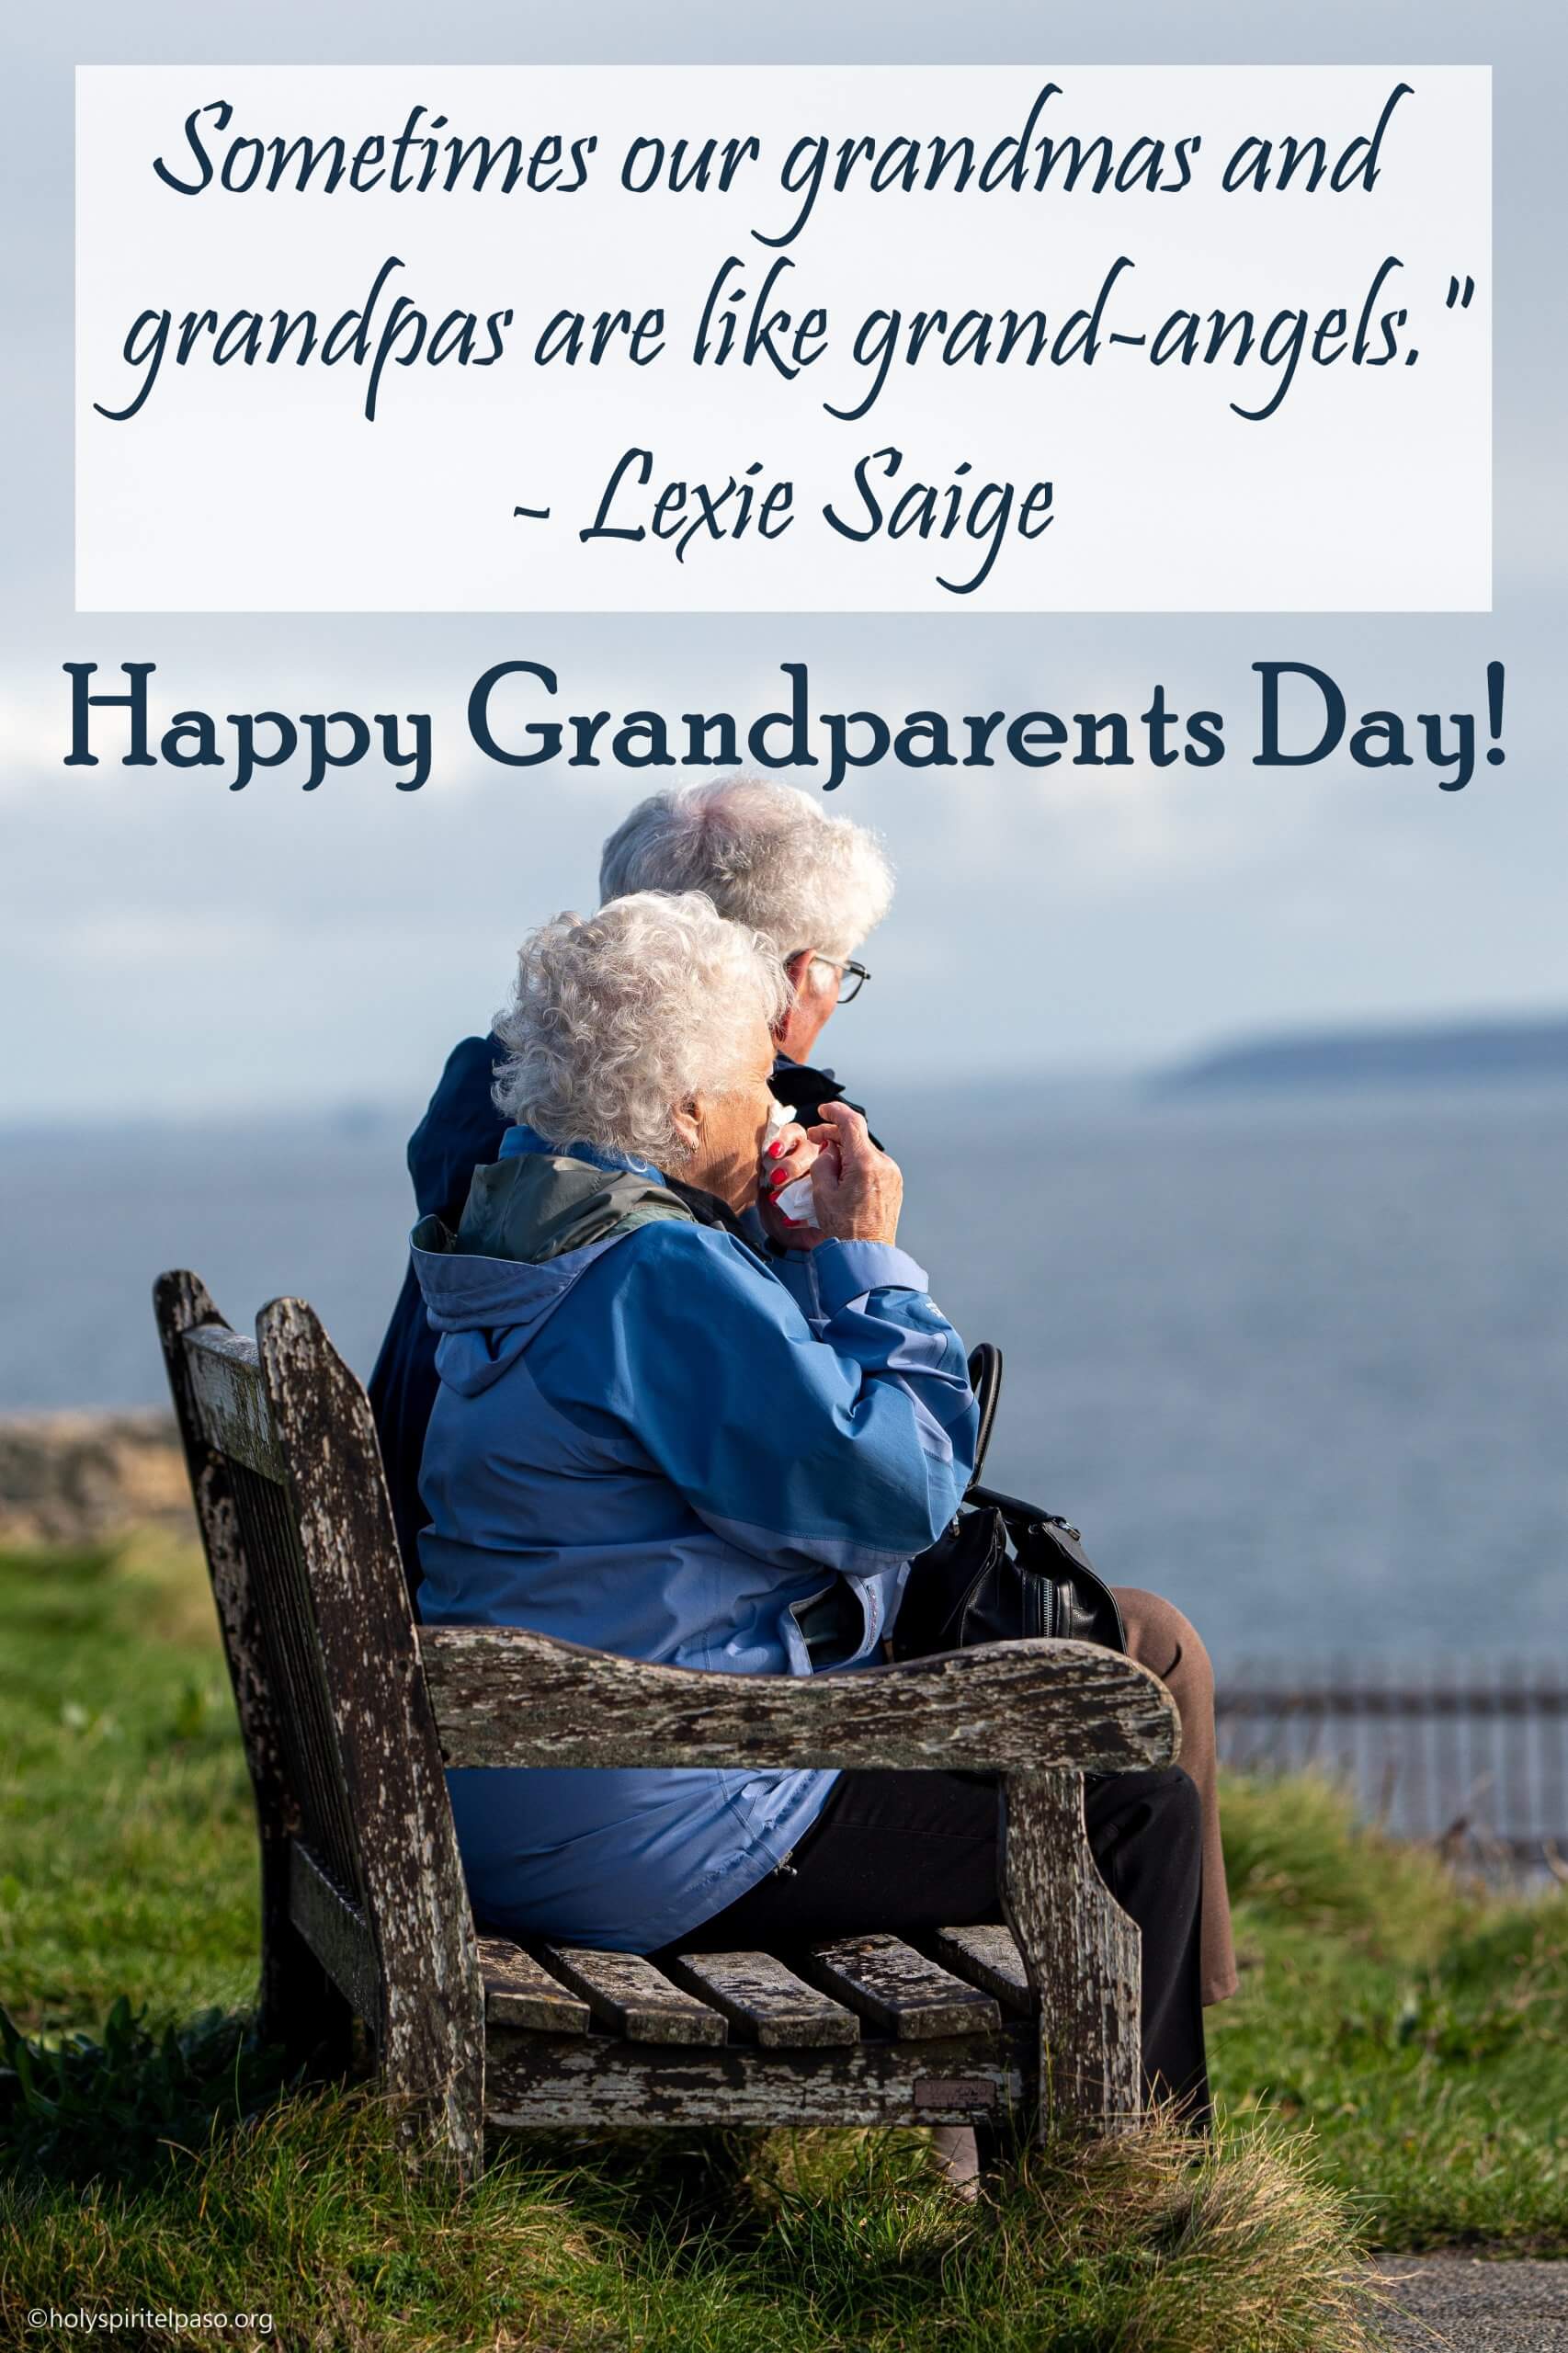 Grandparents Day Quotes - 47 Inspirational Sayings For Grandparents